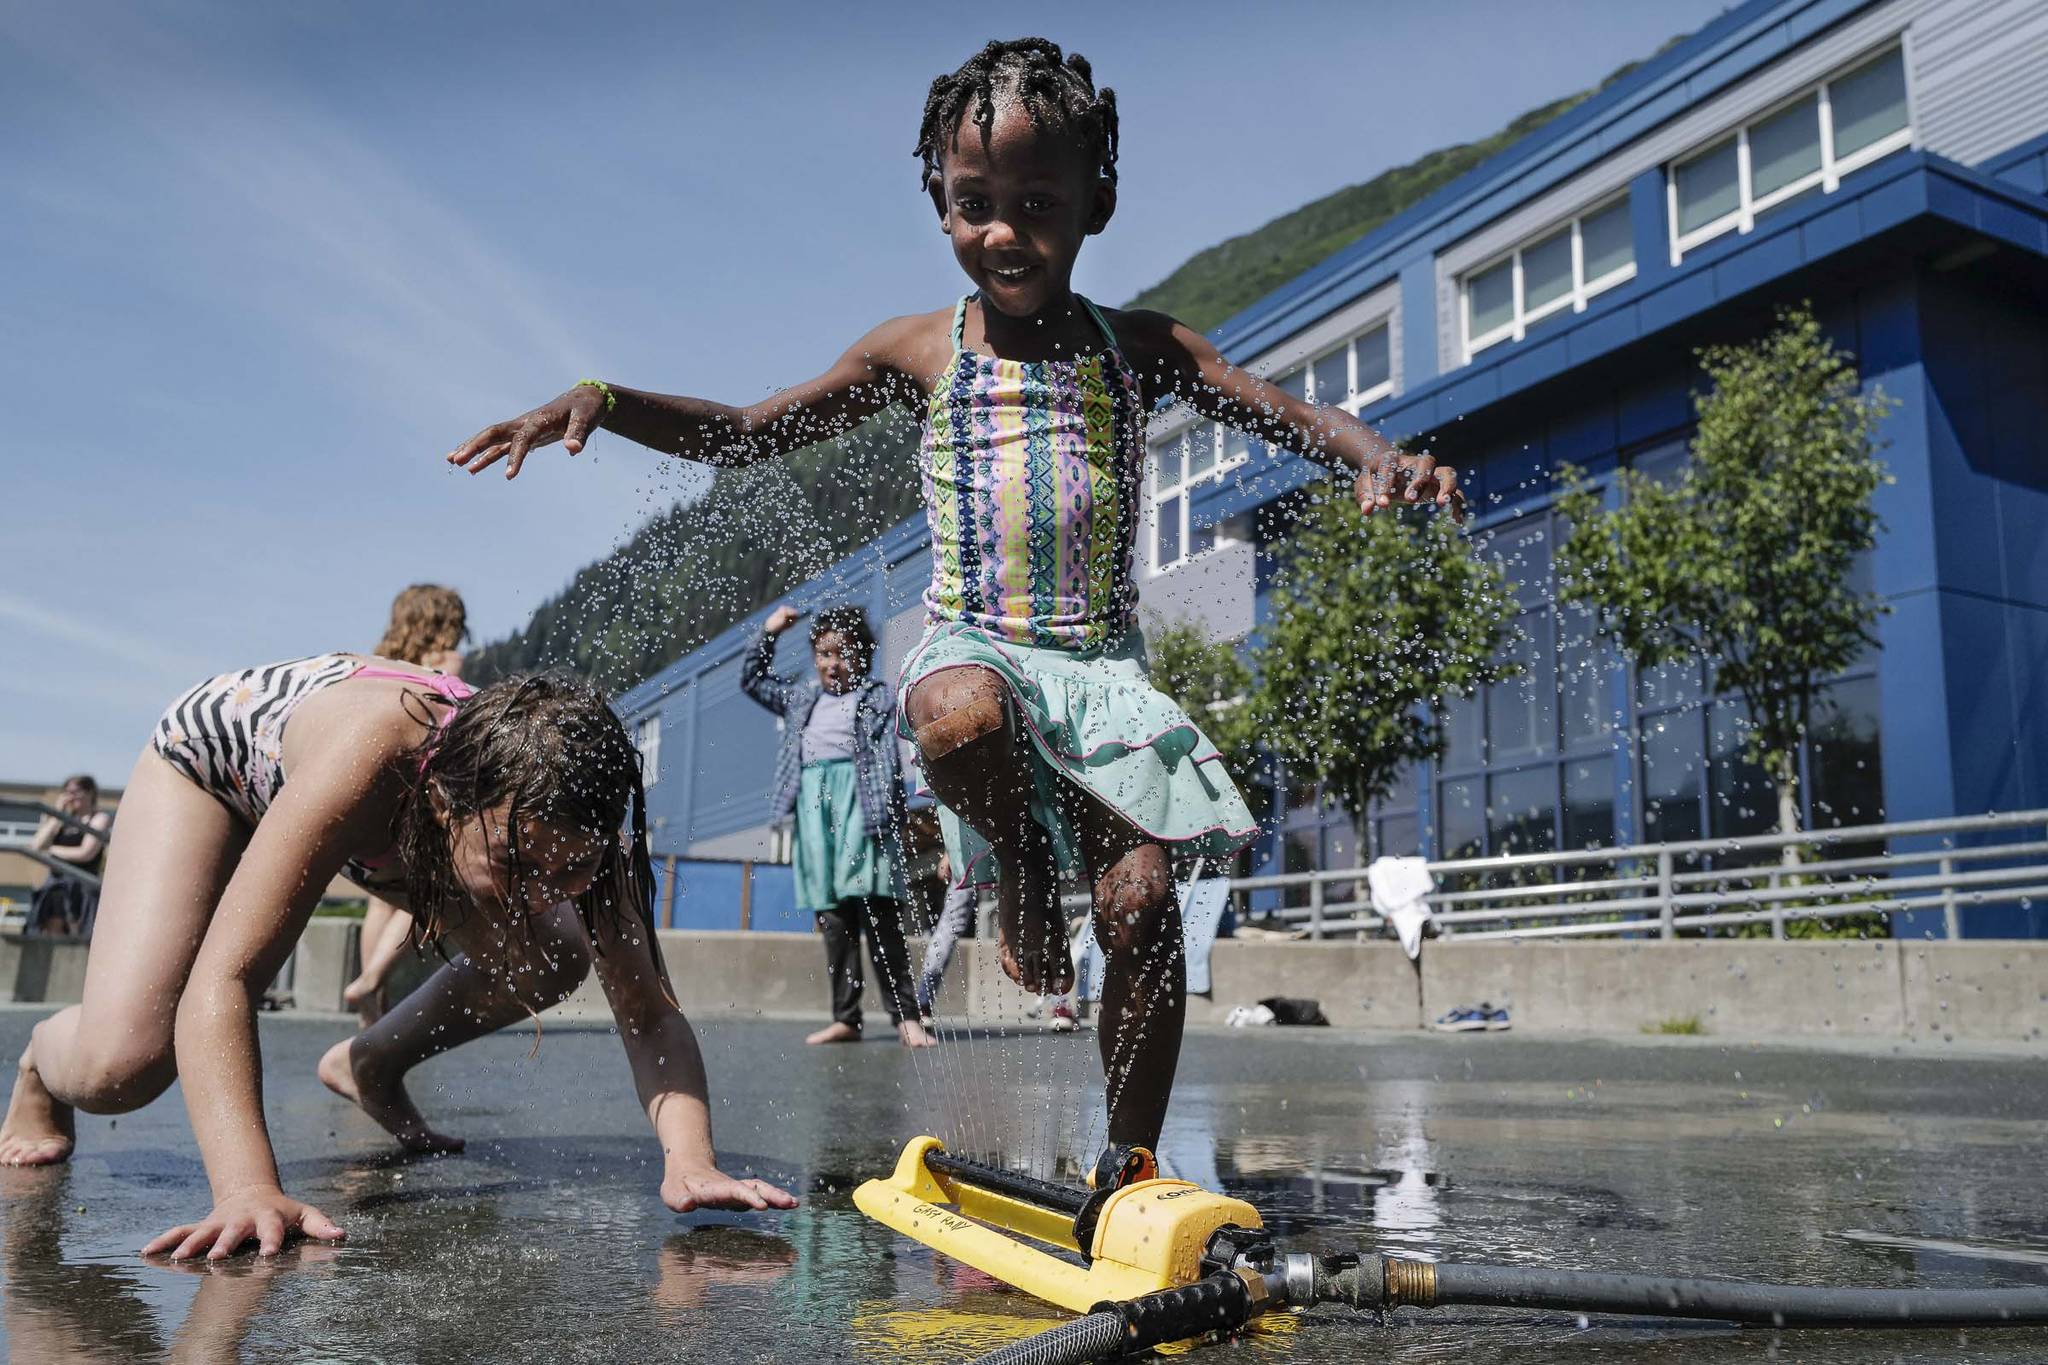 Dallas Hamblin, 5, and Neveah Berryhill, 9, left, play in a sprinkler set up during the RALLY program at Harborview Elementary School on Wednesday, June 26, 2019. (Michael Penn | Juneau Empire)